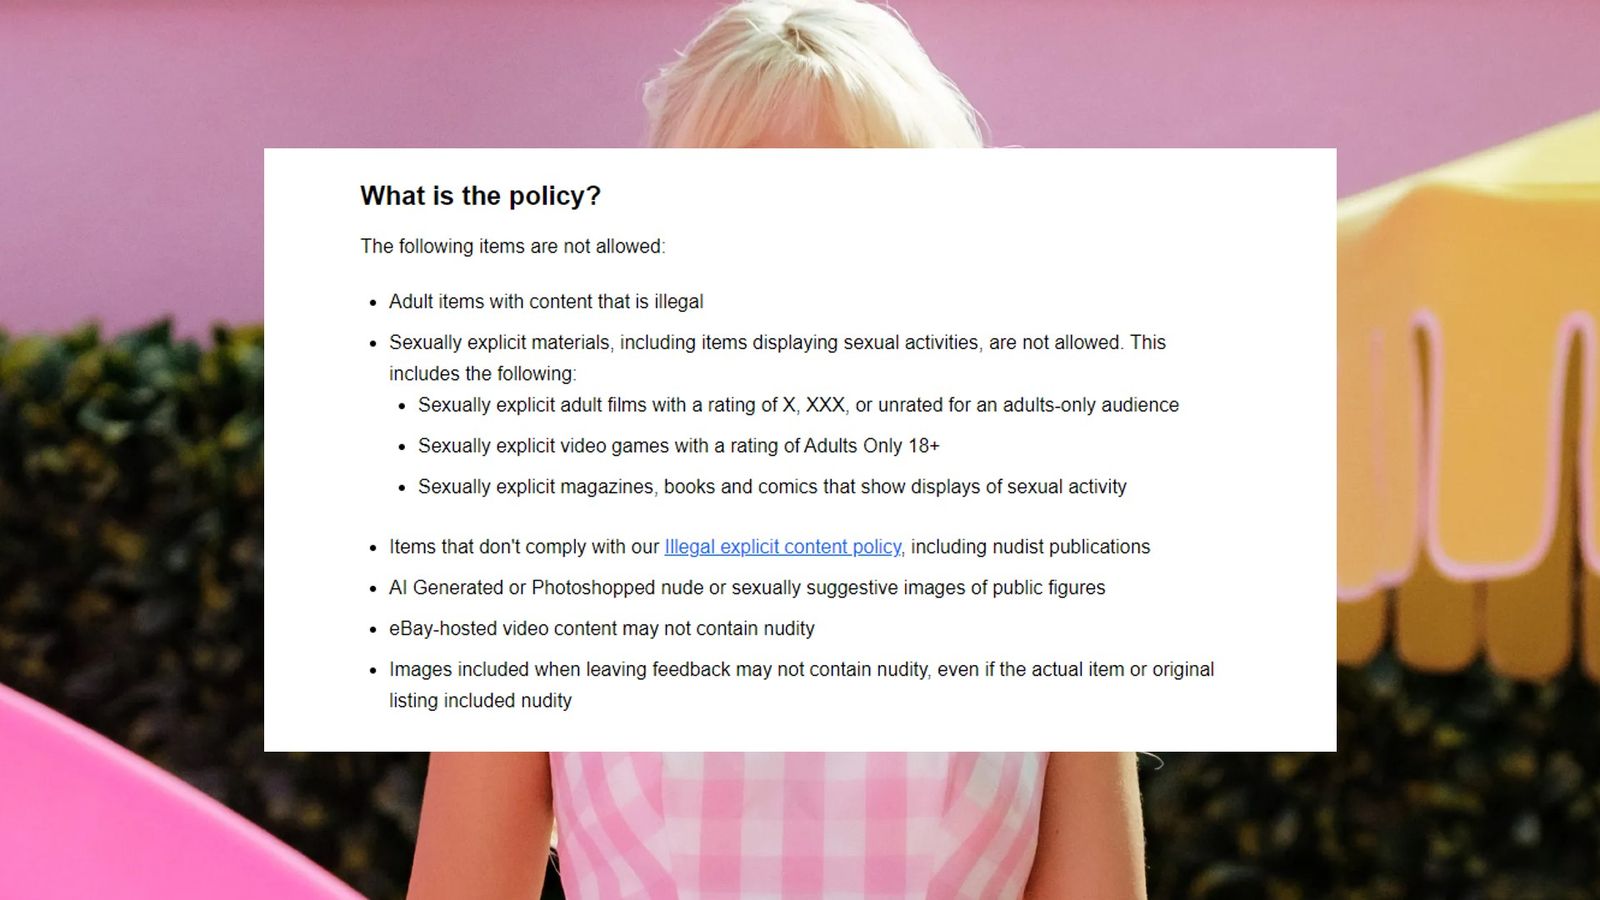 eBay's Adult Item Policy in front of an image of Margot Robbie from Barbie